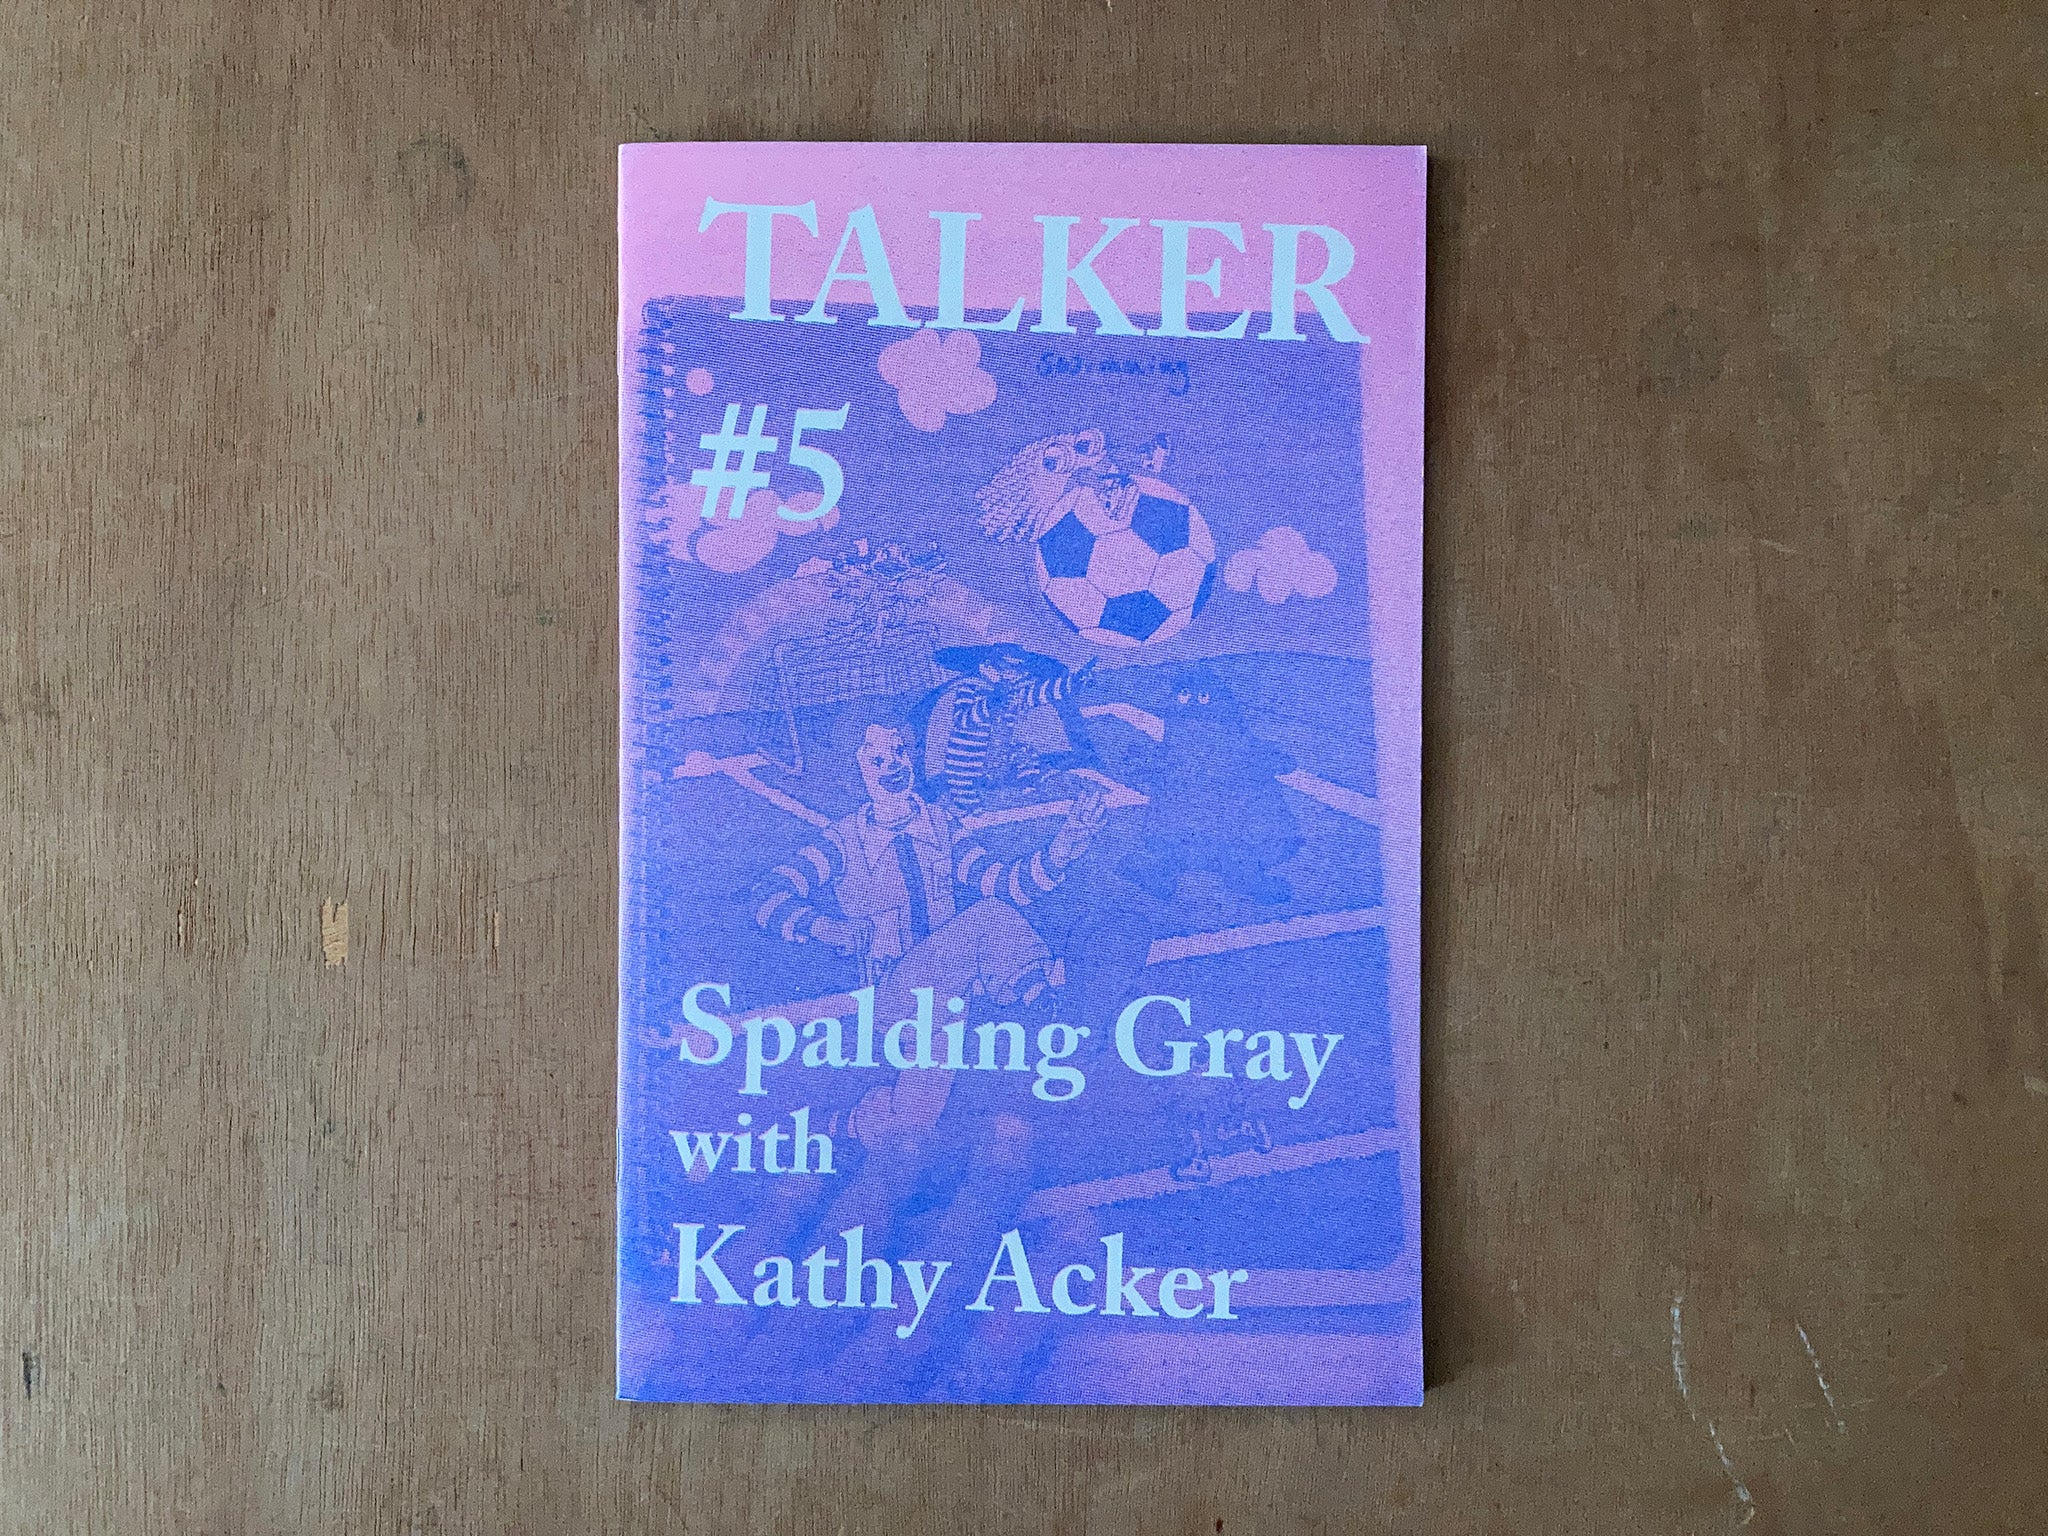 TALKER #5: SPALDING GRAY WITH KATHY ACKER